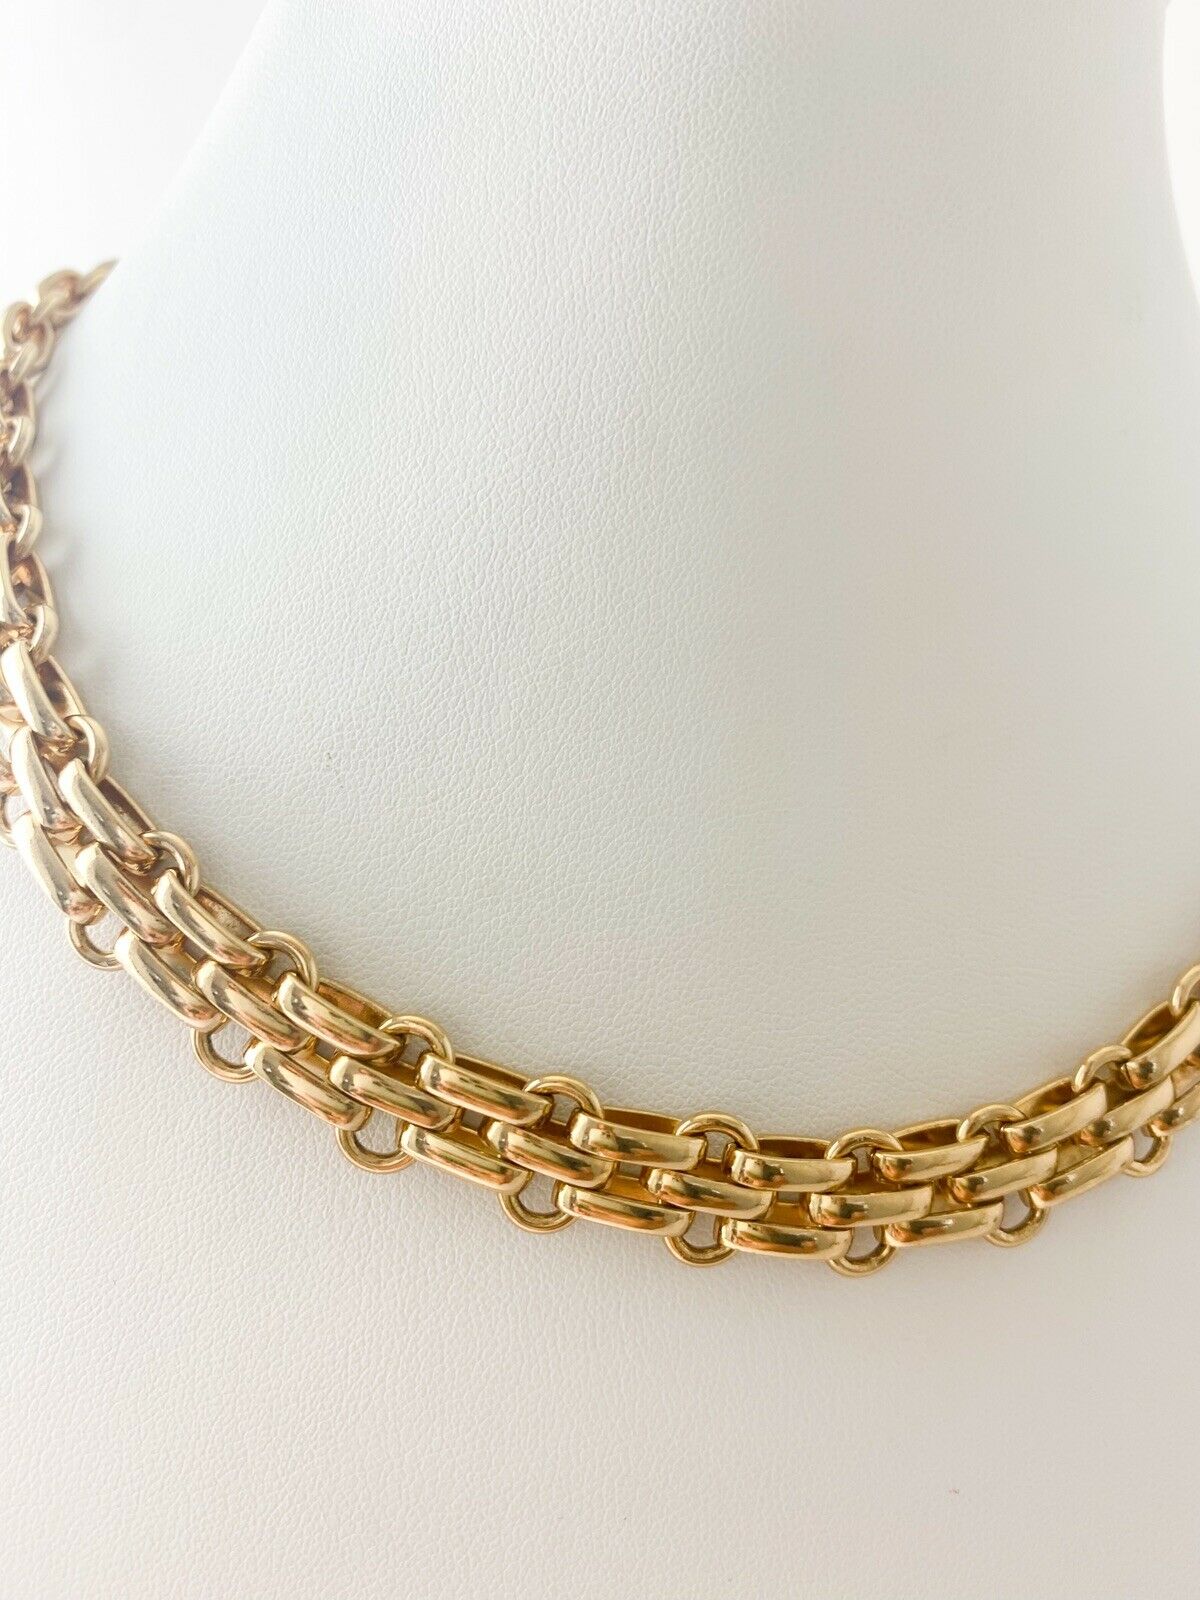 Christian Dior Gold Tone Vintage Beautiful Choker Chain Necklace